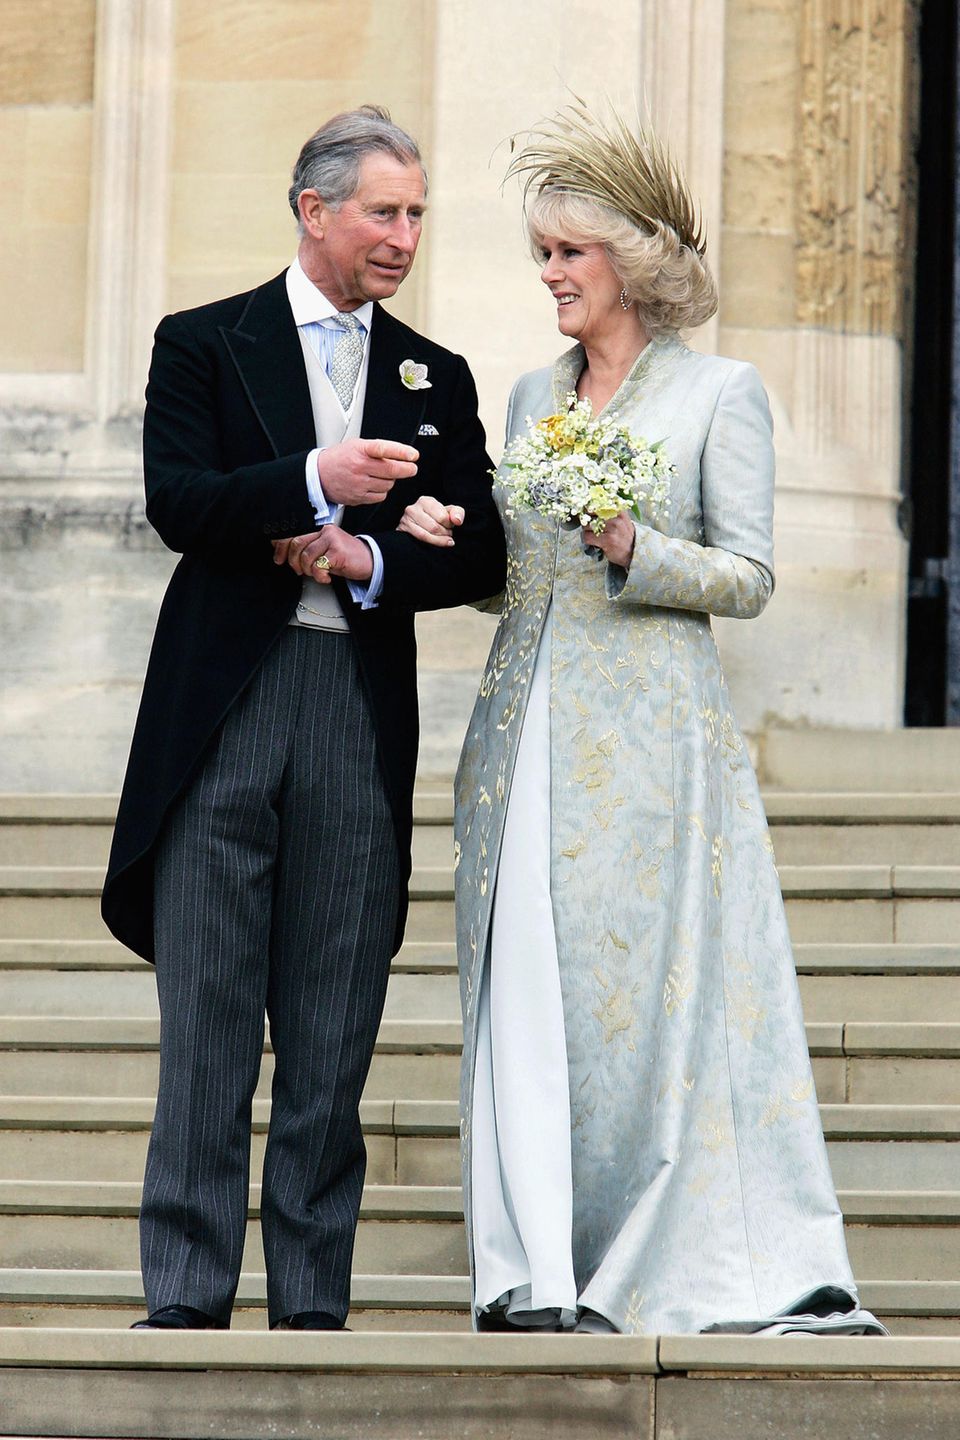 April 9, 2005 When Prince Charles was finally able to marry his great love Camilla Parker-Bowles, she was radiant in a beige-blue silk chiffon dress, over which she wore an intricately embroidered silk coat.  Philip Treacy's feather-studded hat was a real eye-catcher.